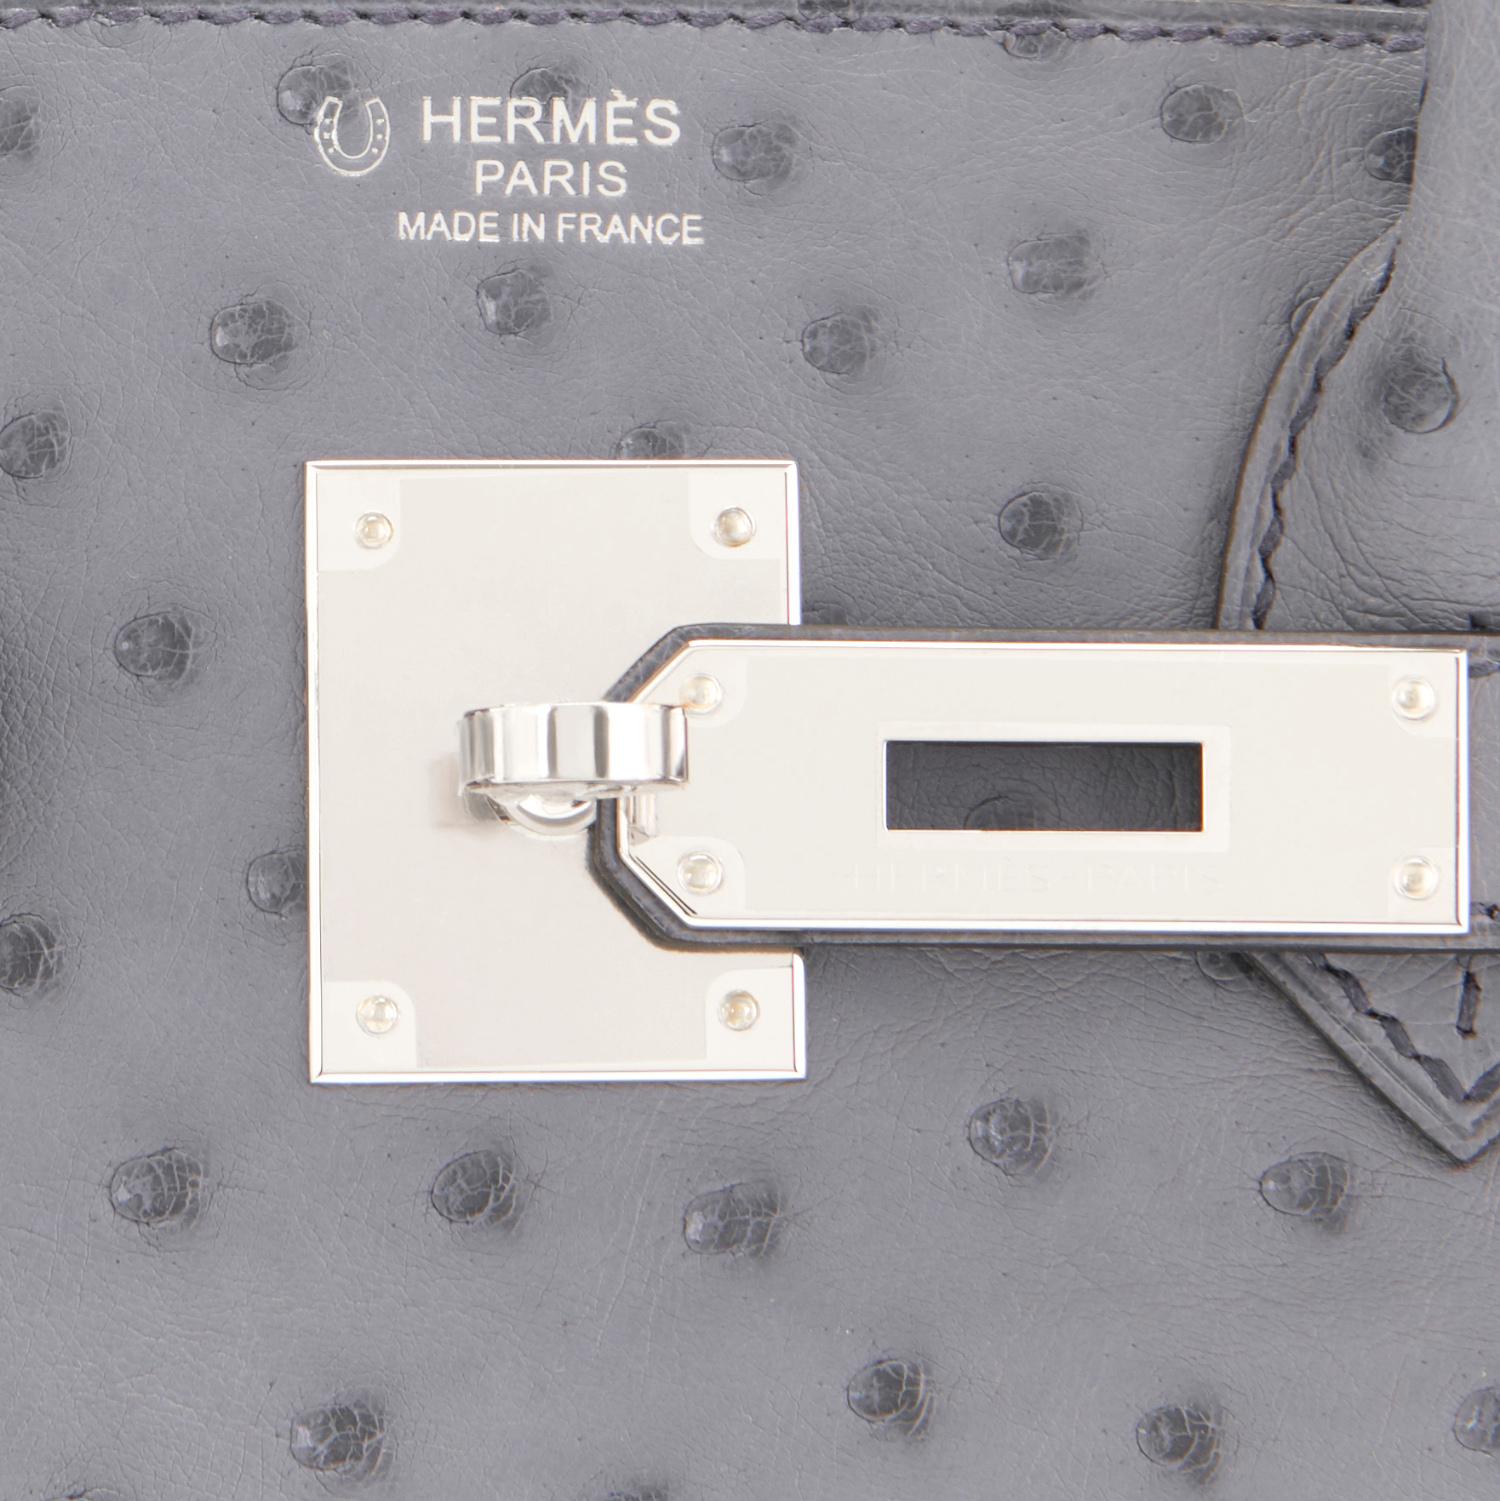 World Exclusive Horse Shoe Stamp Hermes Birkin 30 HSS Ostrich Gris Agate Gris Perle Grey Bag
Brand New in Box. Store fresh. Pristine Condition (with plastic on hardware) 
Just picked up from Hermes store; bag bears new interior C Stamp.
Perfect